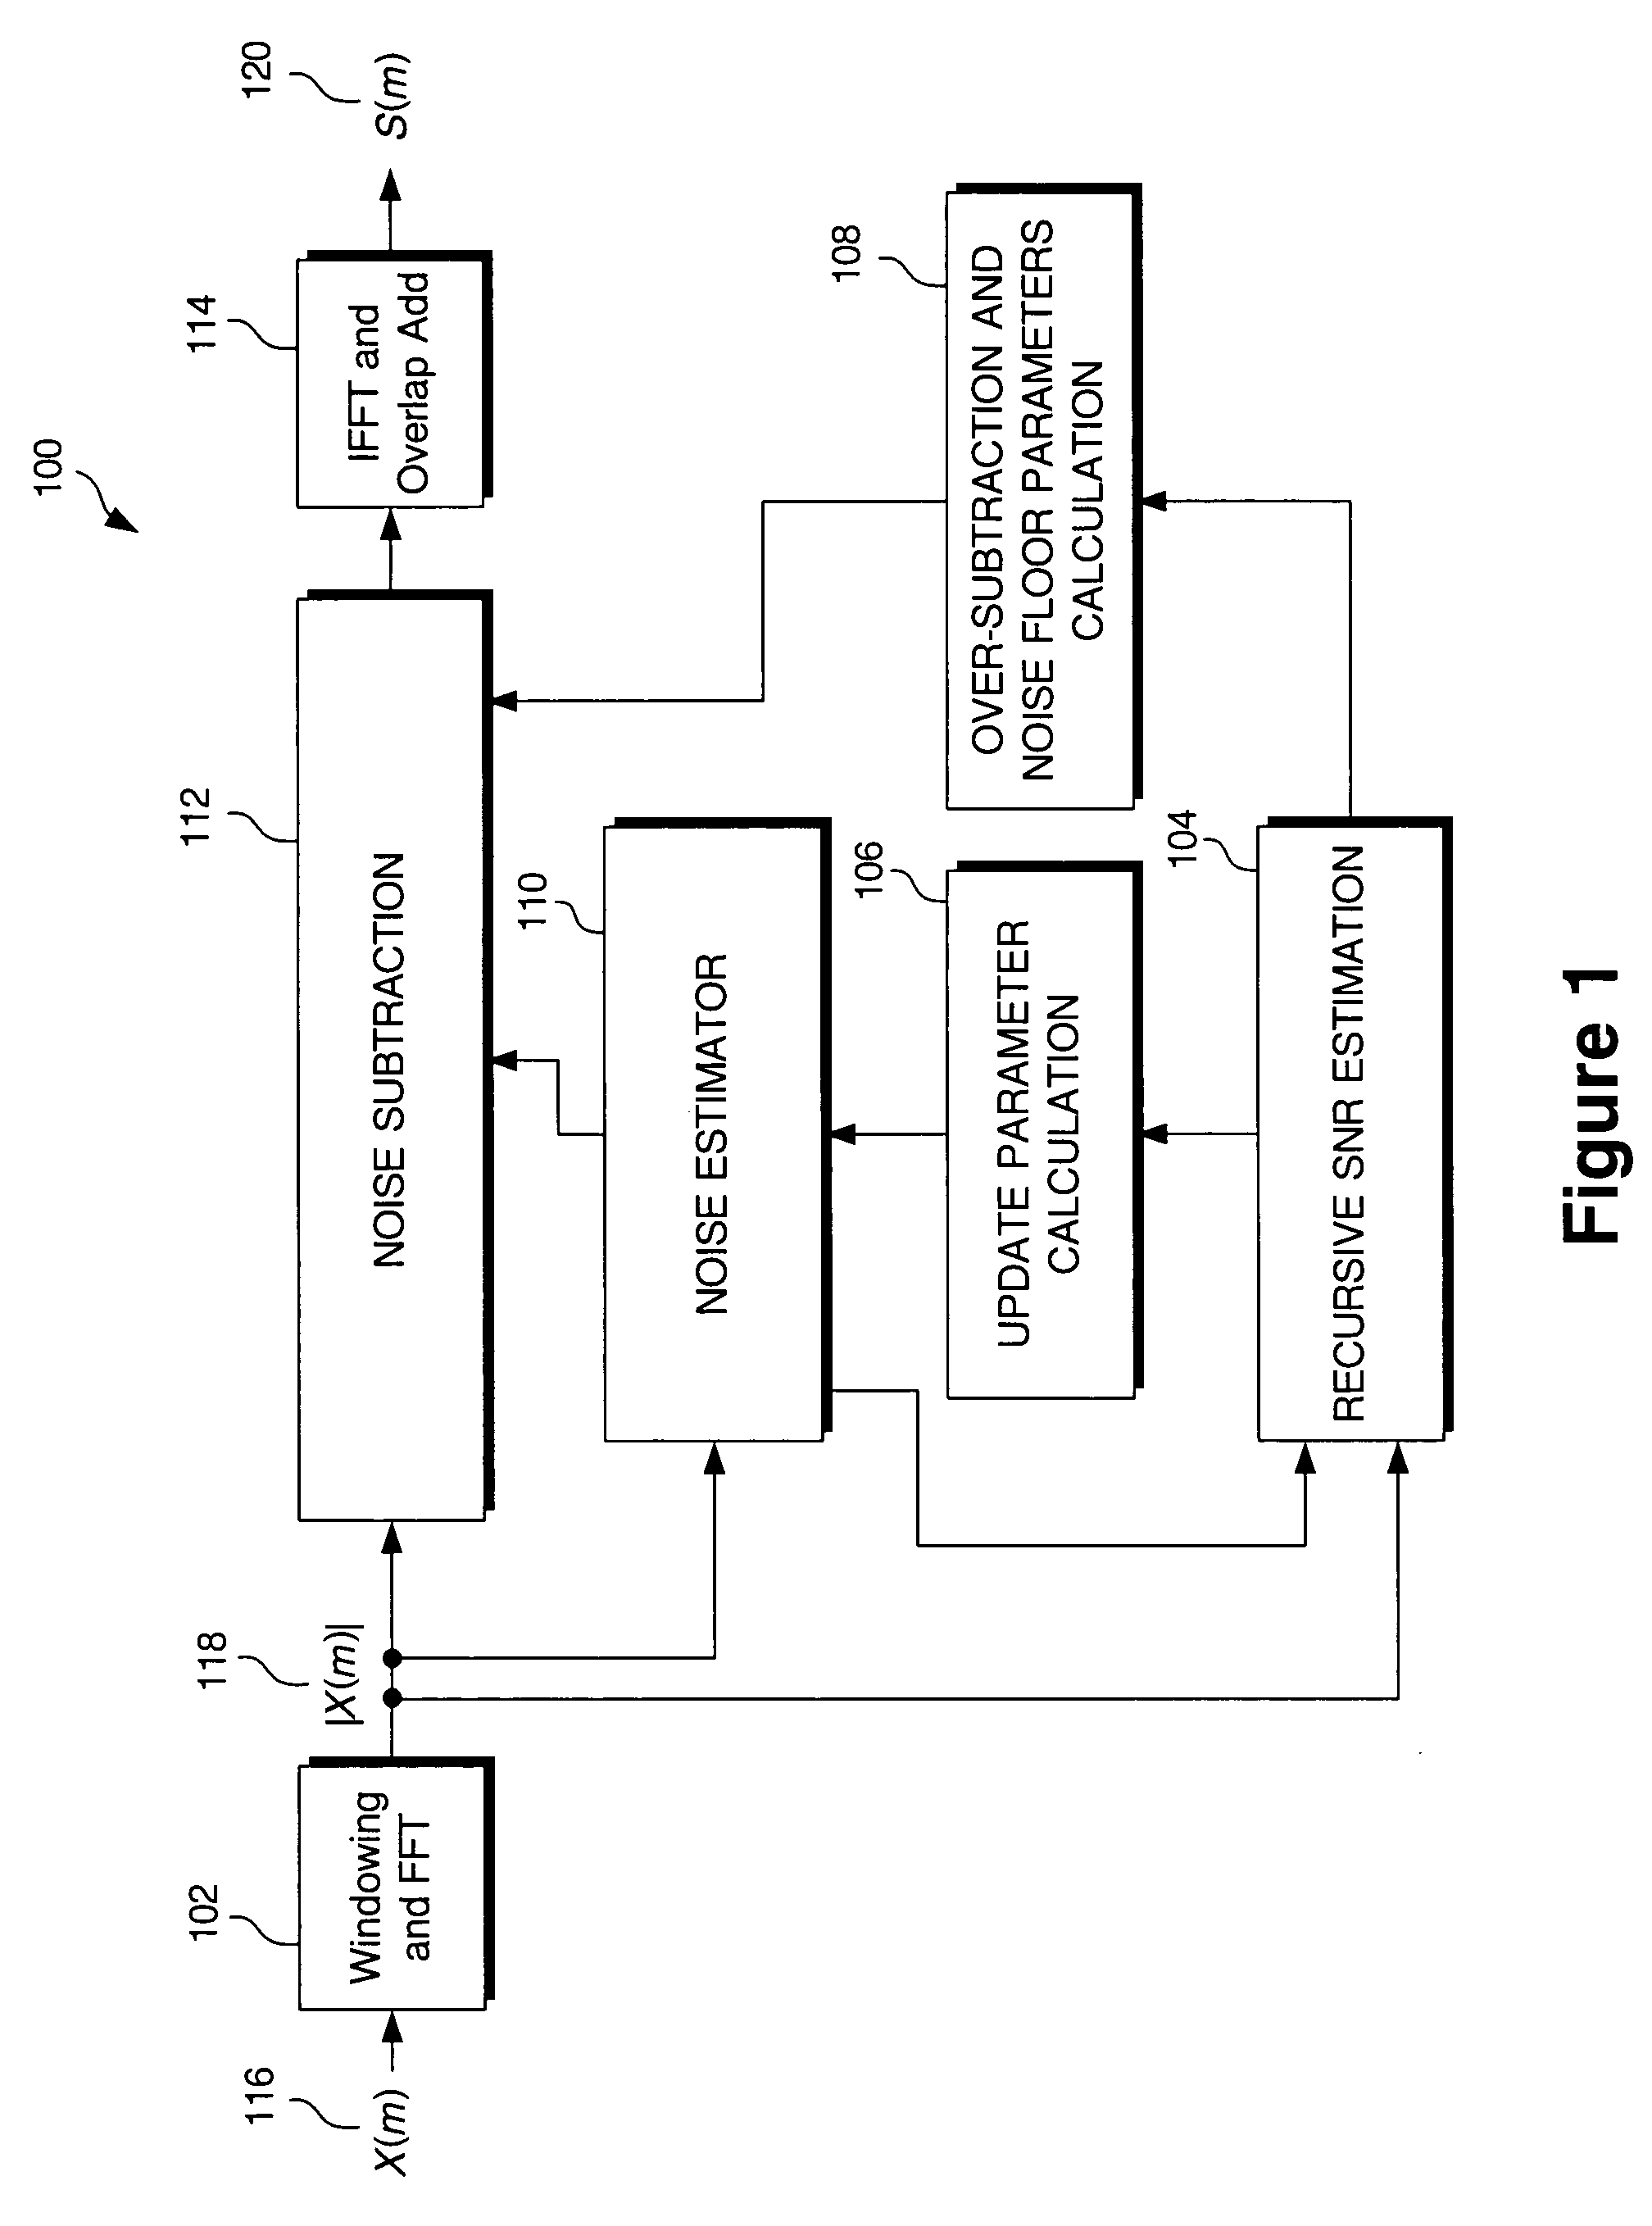 Computationally efficient background noise suppressor for speech coding and speech recognition